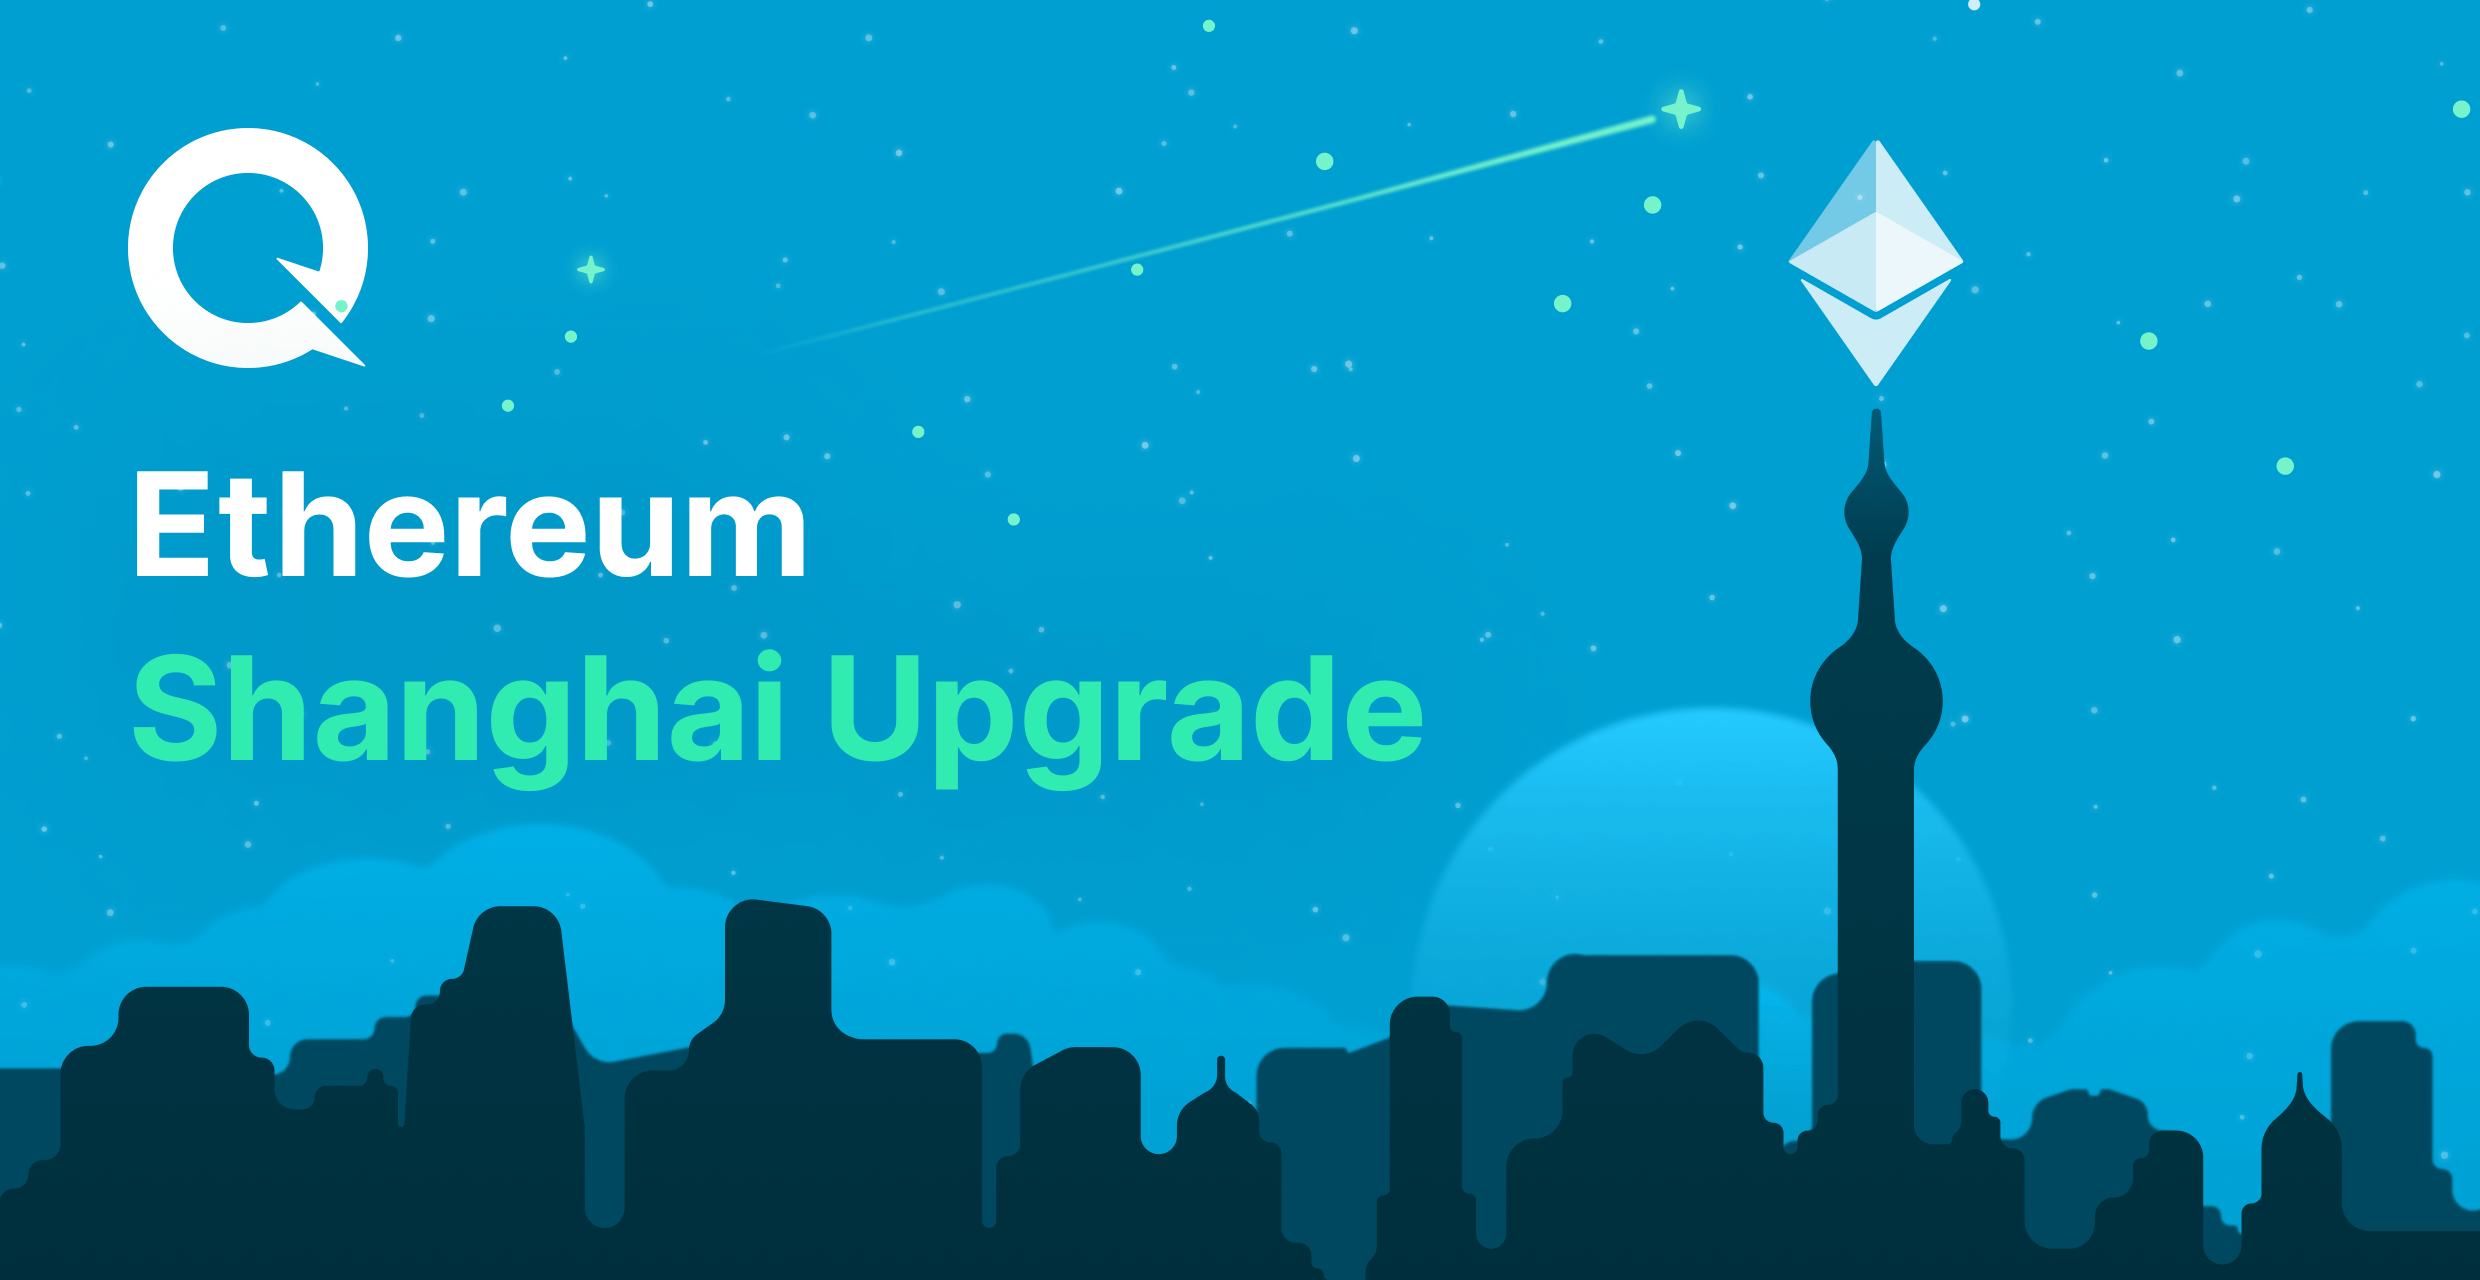 The Ethereum Shanghai Upgrade: What You Need to Know